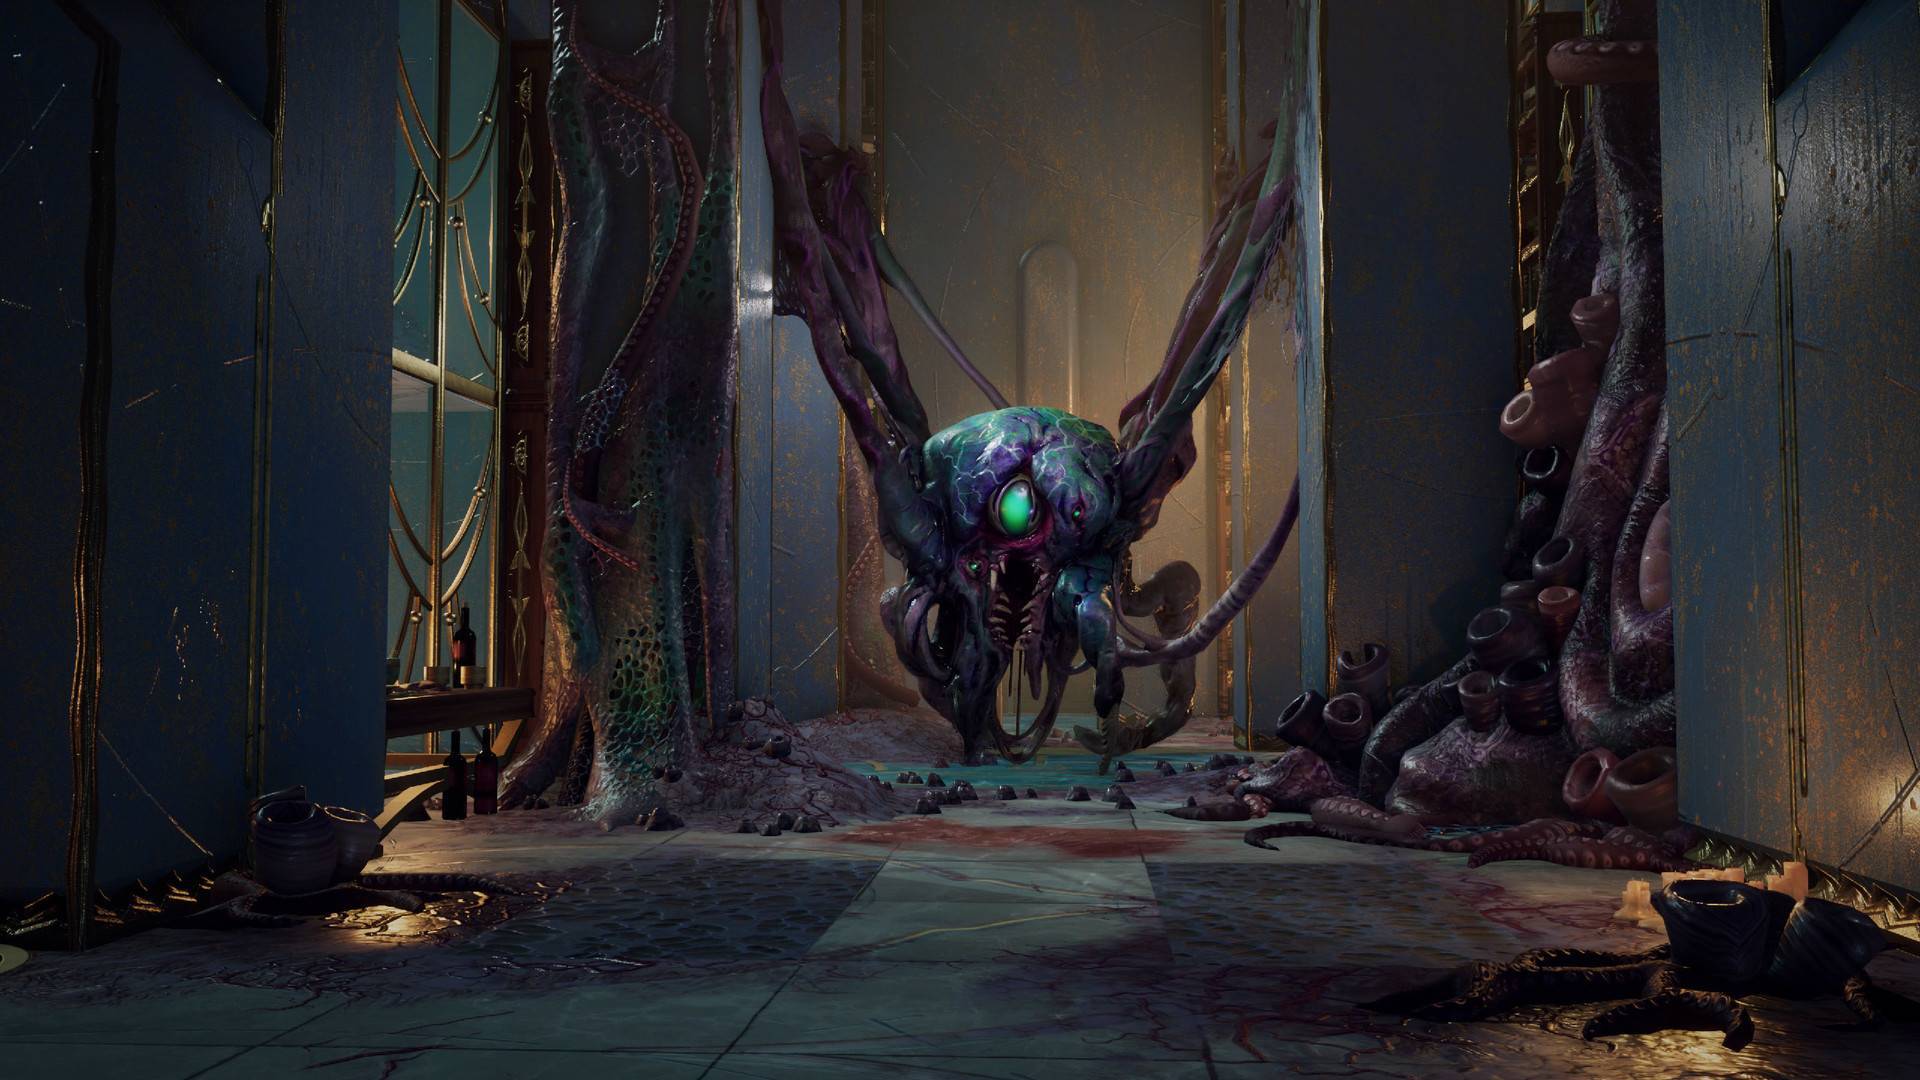 download phoenix point gamepass for free